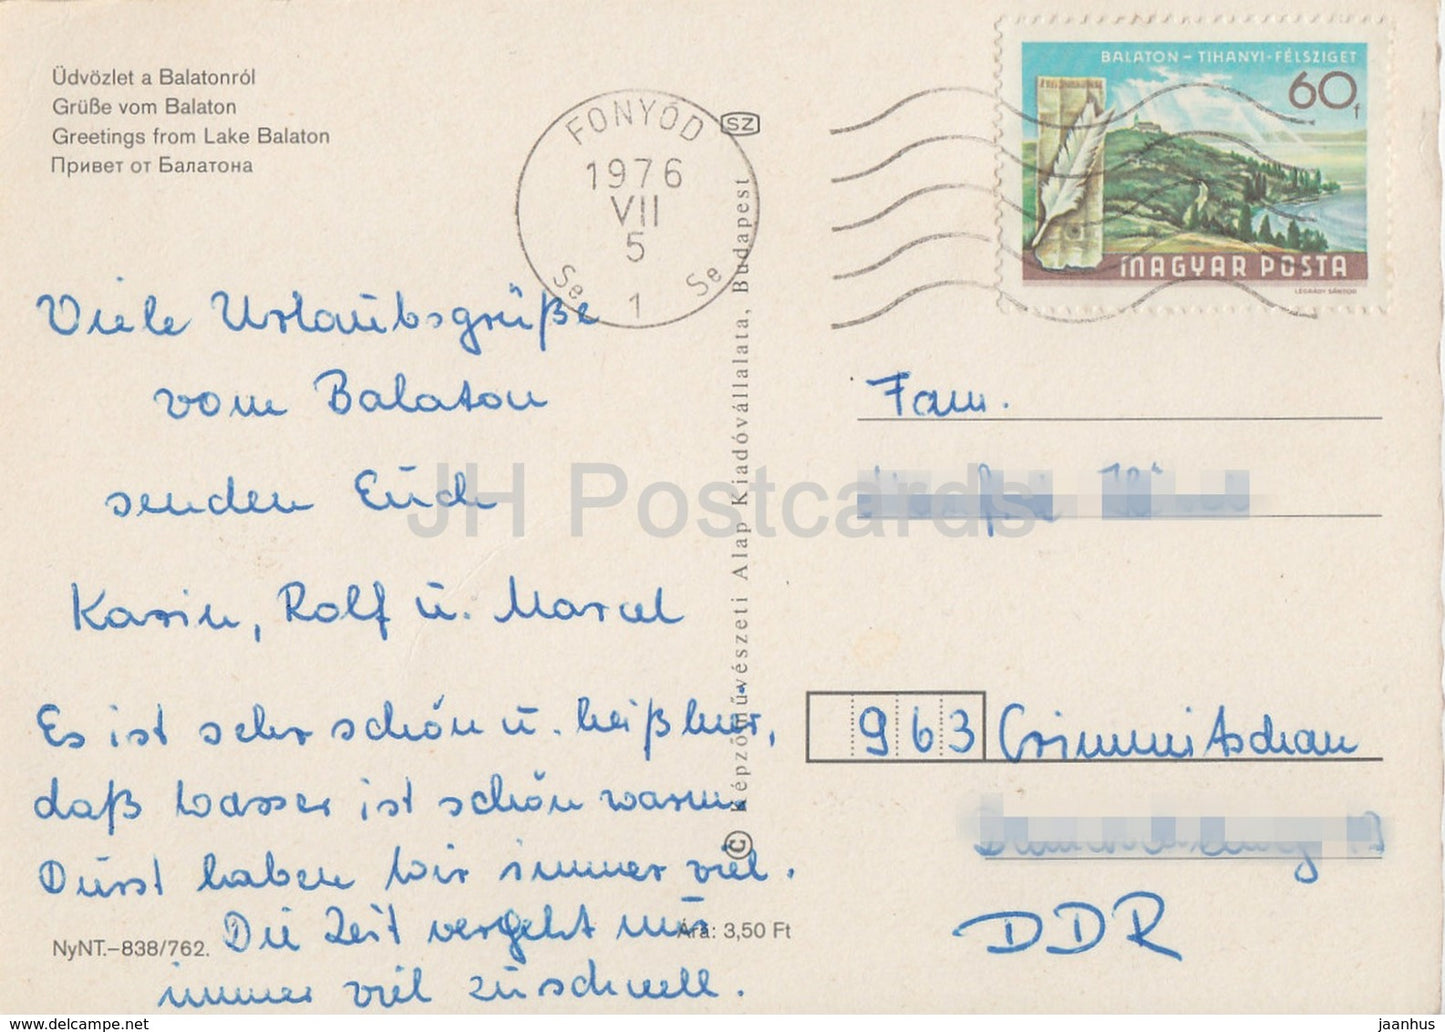 Greetings from the Lake Balaton - boat - restaurant - hotel - multiview - 1976 - Hungary - used